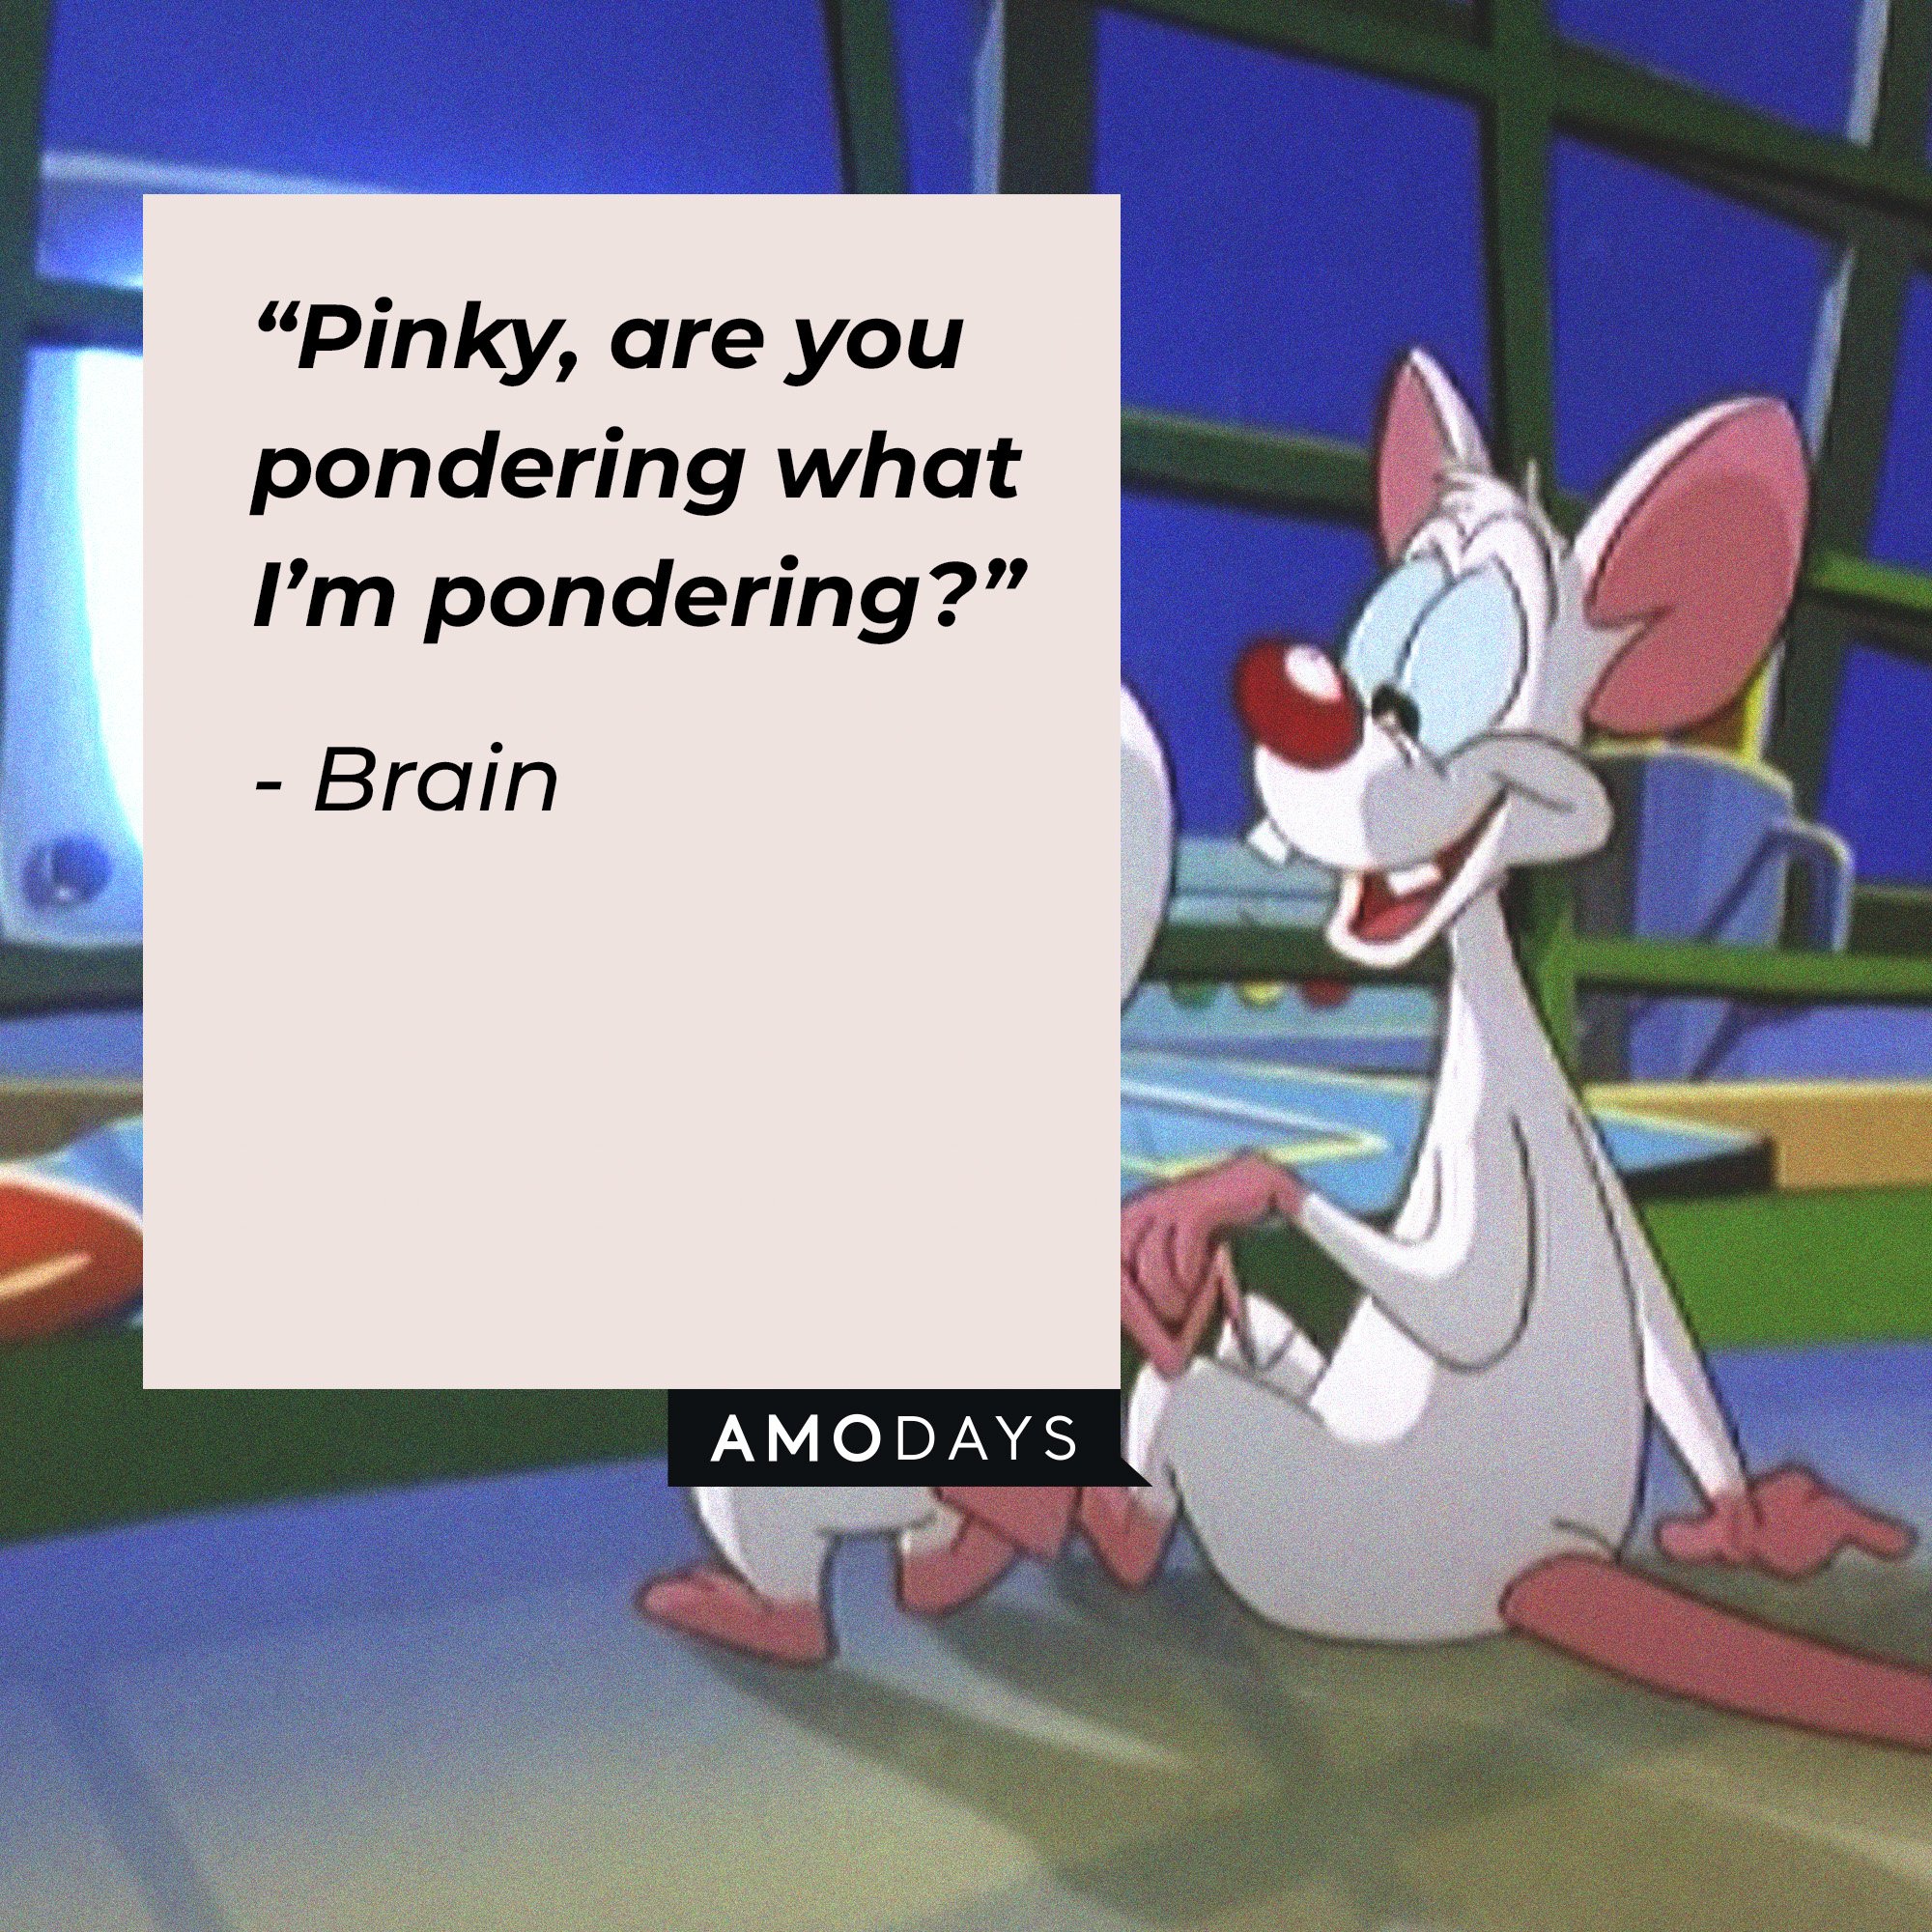   Brain's quote: “Pinky, are you pondering what I’m pondering?” I Image: AmoDays